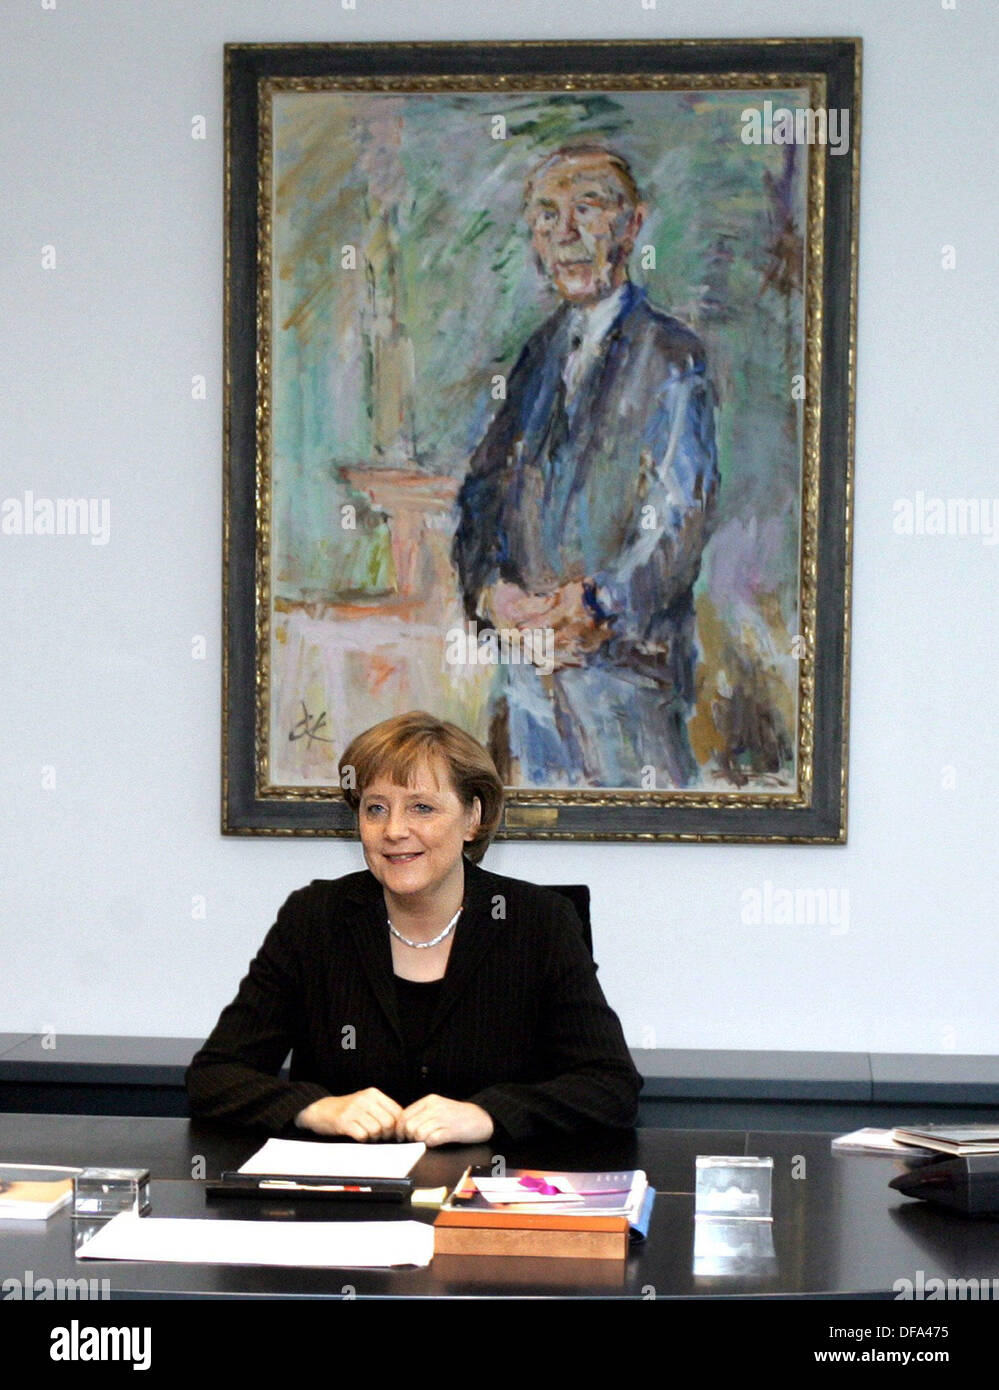 German chancellor Angela Merkel (CDU) at her desk on the 21st of February in 2006 in front of a painting of former German chancellor Konrad Adenauer by painter Oskar Kokoschka. Stock Photo